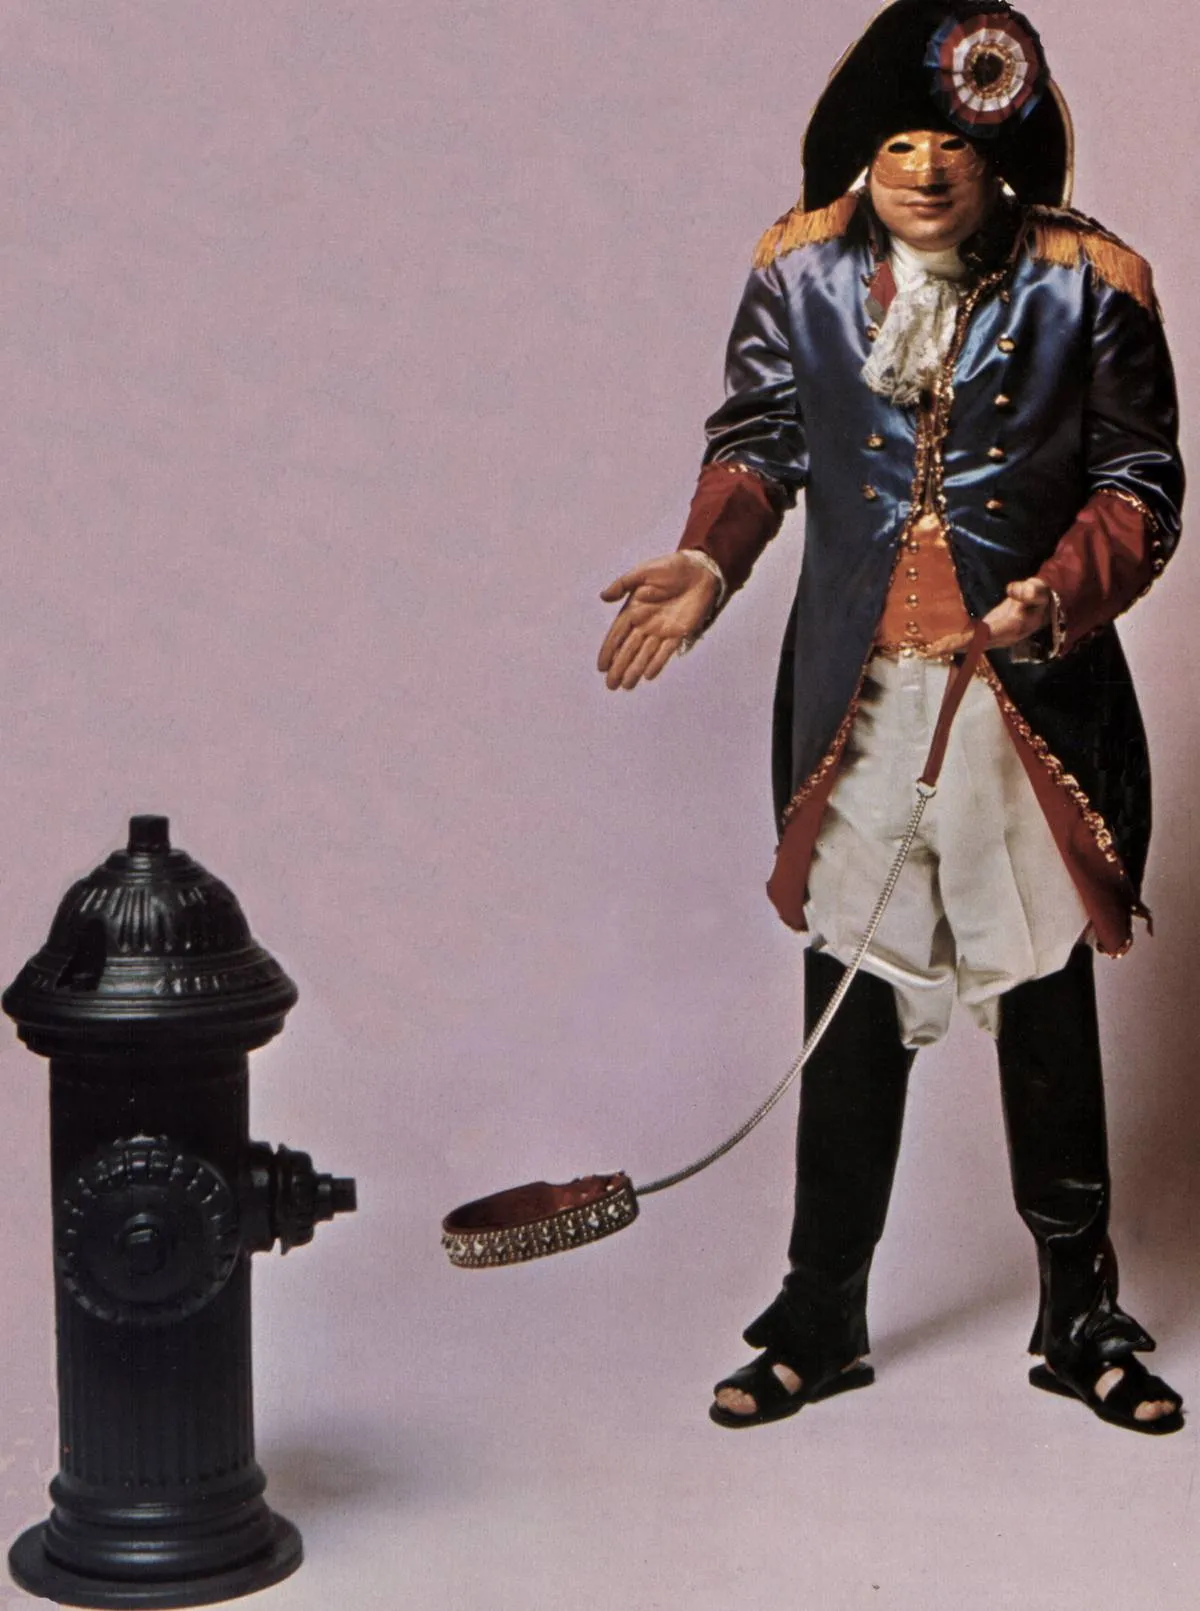 Photo of NAPOLEON XIV; Jerry Samuels - In costume with empty dog lead promo art for song 